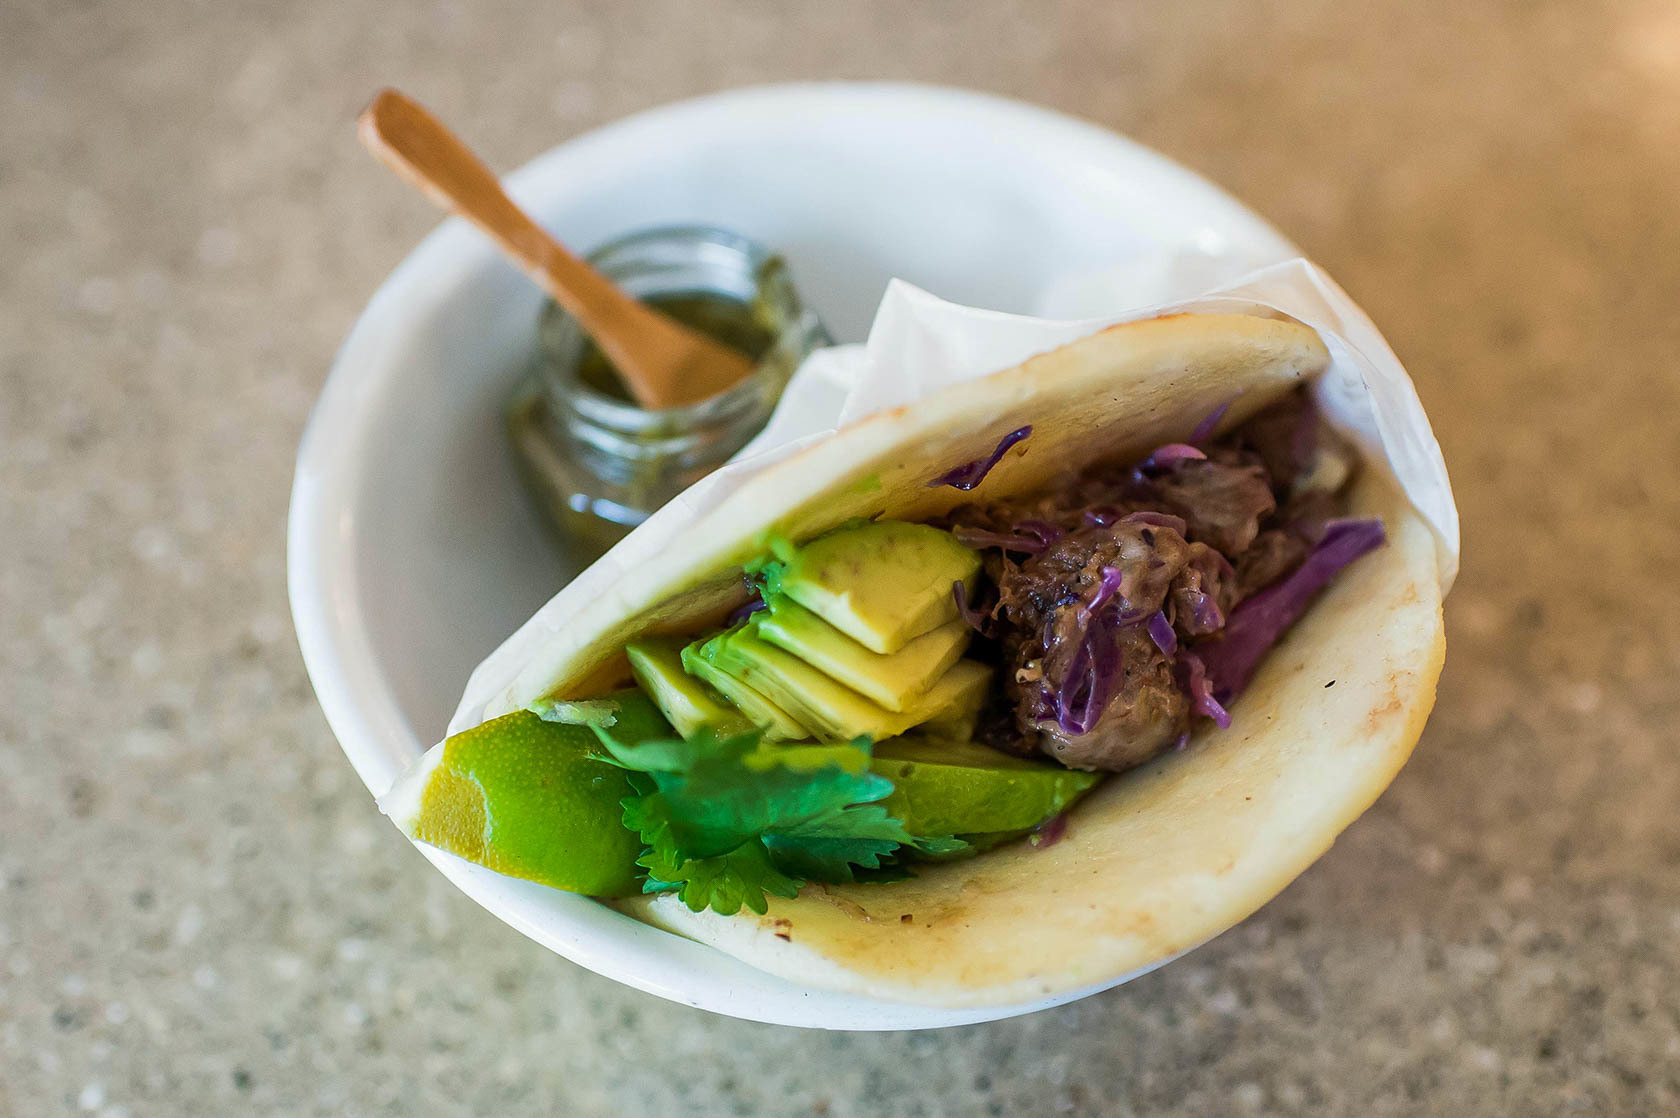 Beef and avocado are among the arepa fillings offered at The Royal. Filling options may vary by region, but the arepa itself remains constant.